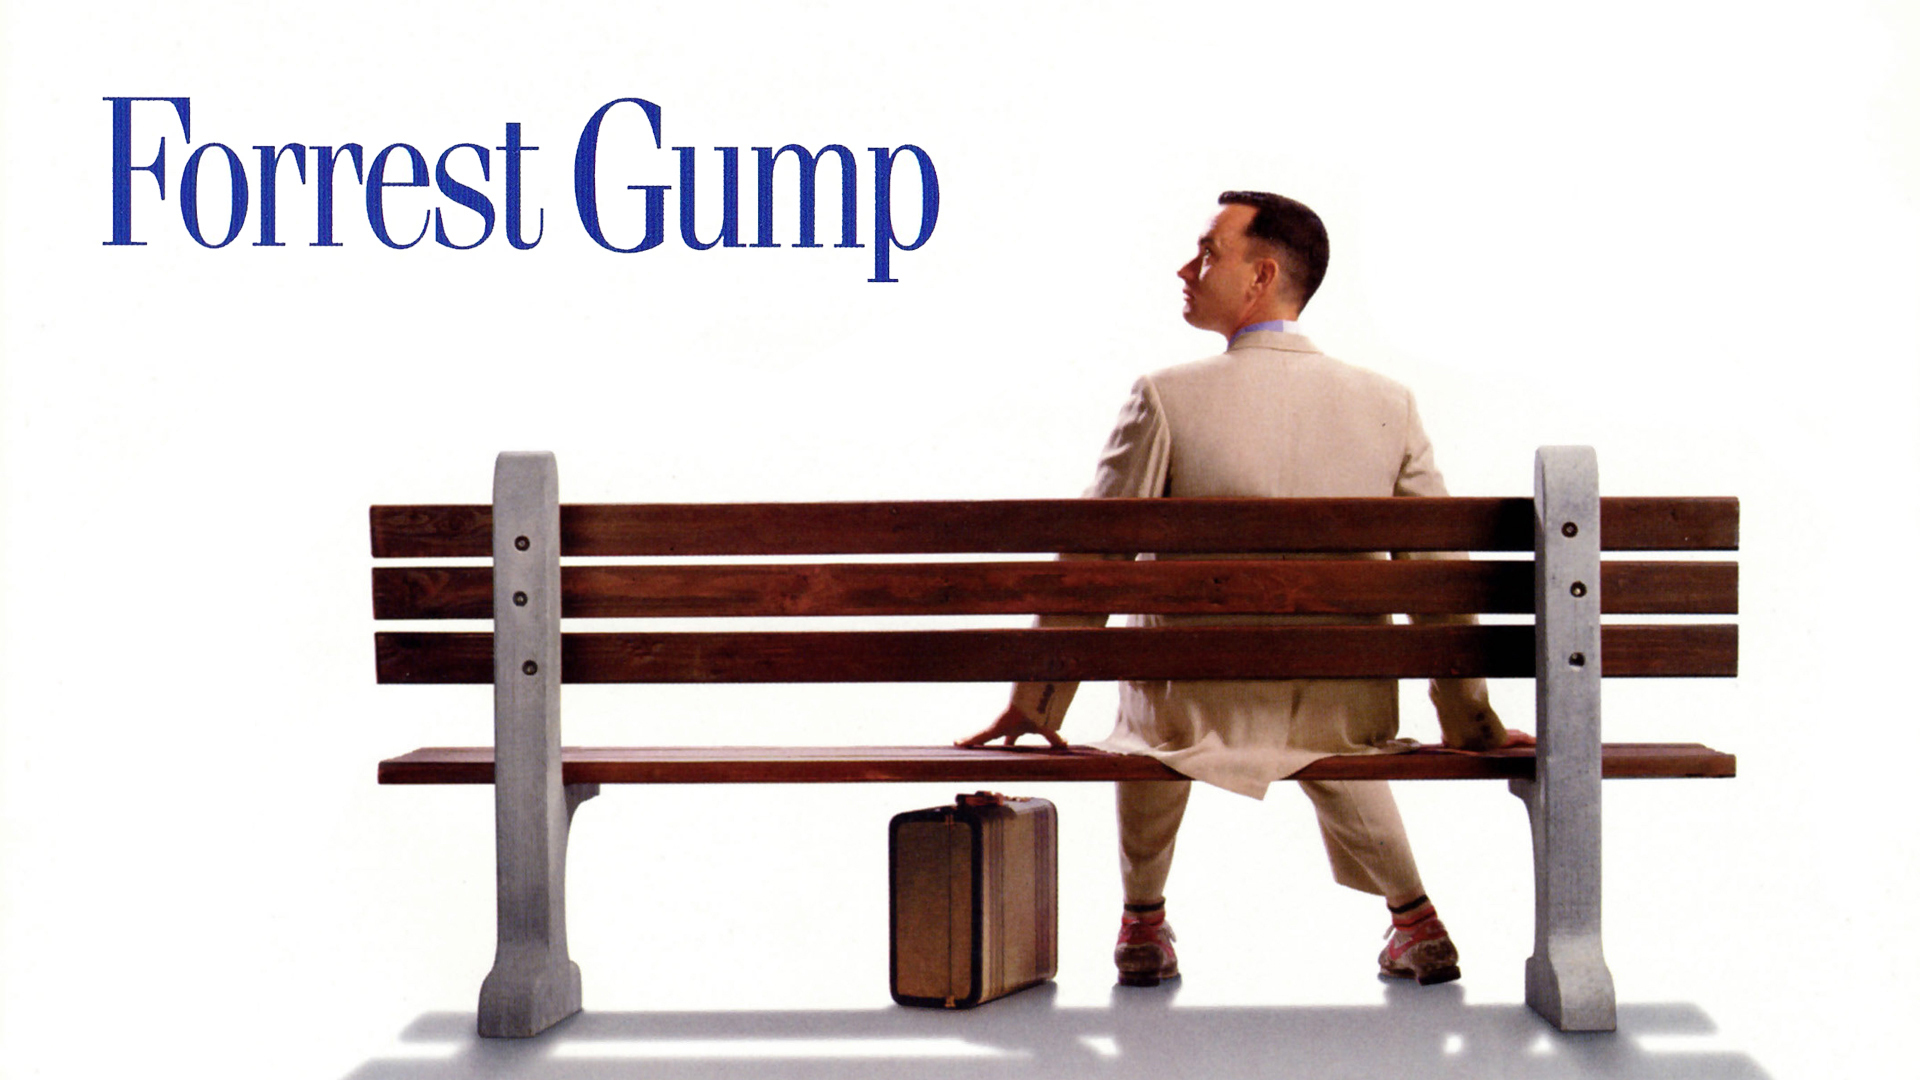 Can You Match the Movie to Its Tagline? forrest gump